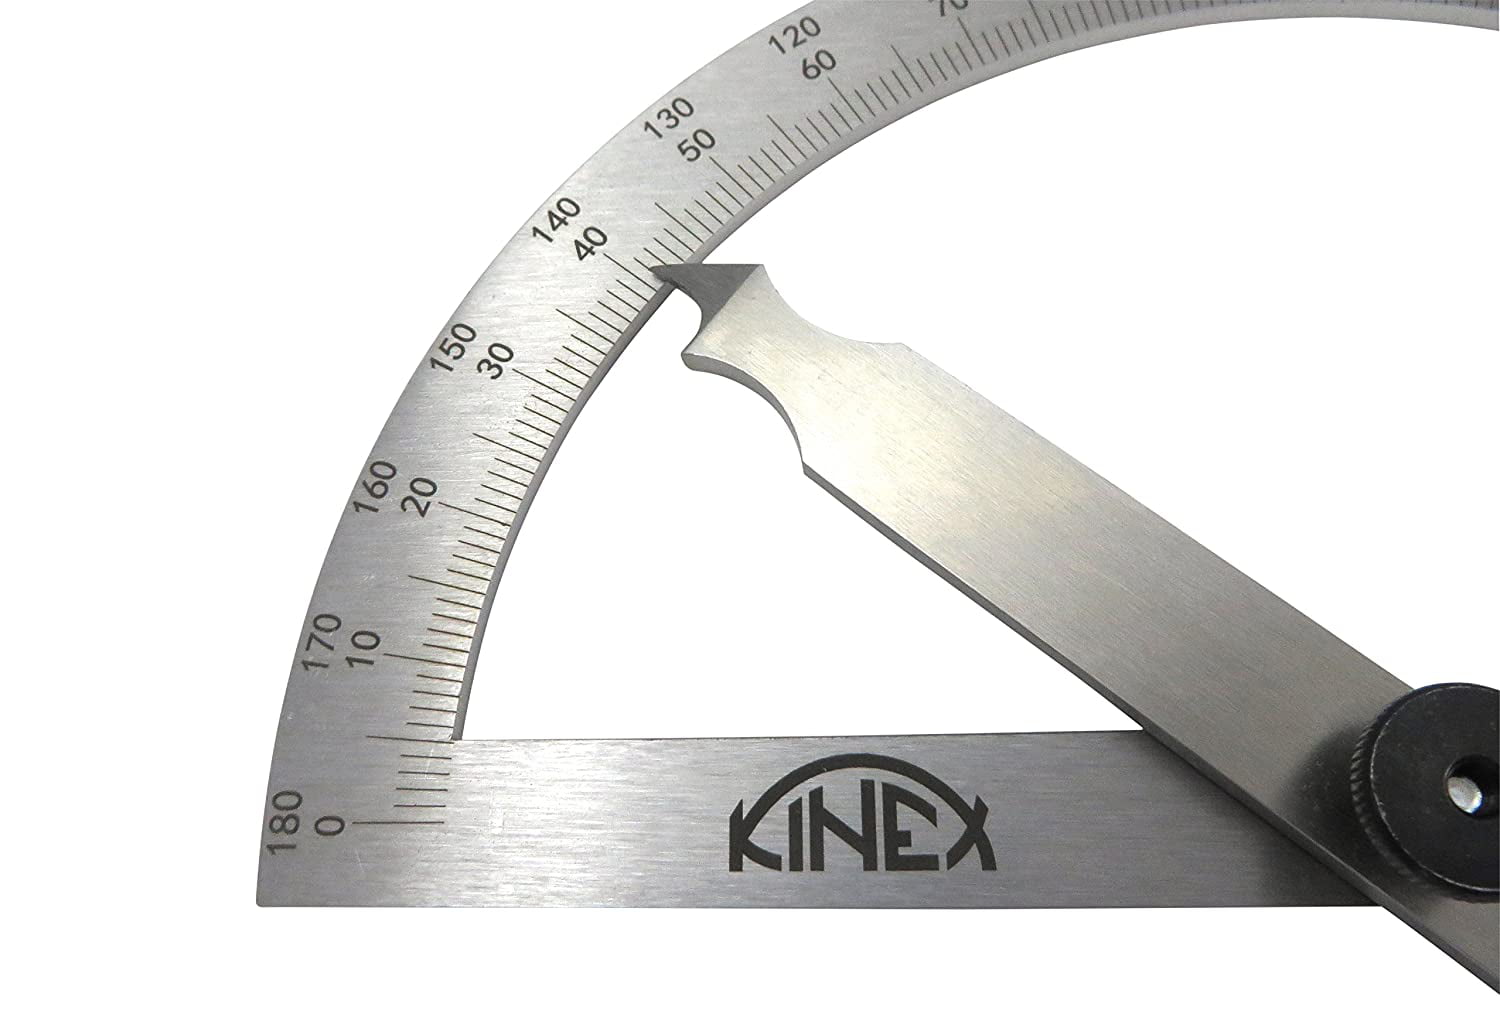 Kinex 250 x 400mm Machinist Protractor Angle Finder Stainless Steel 1089-07-250 